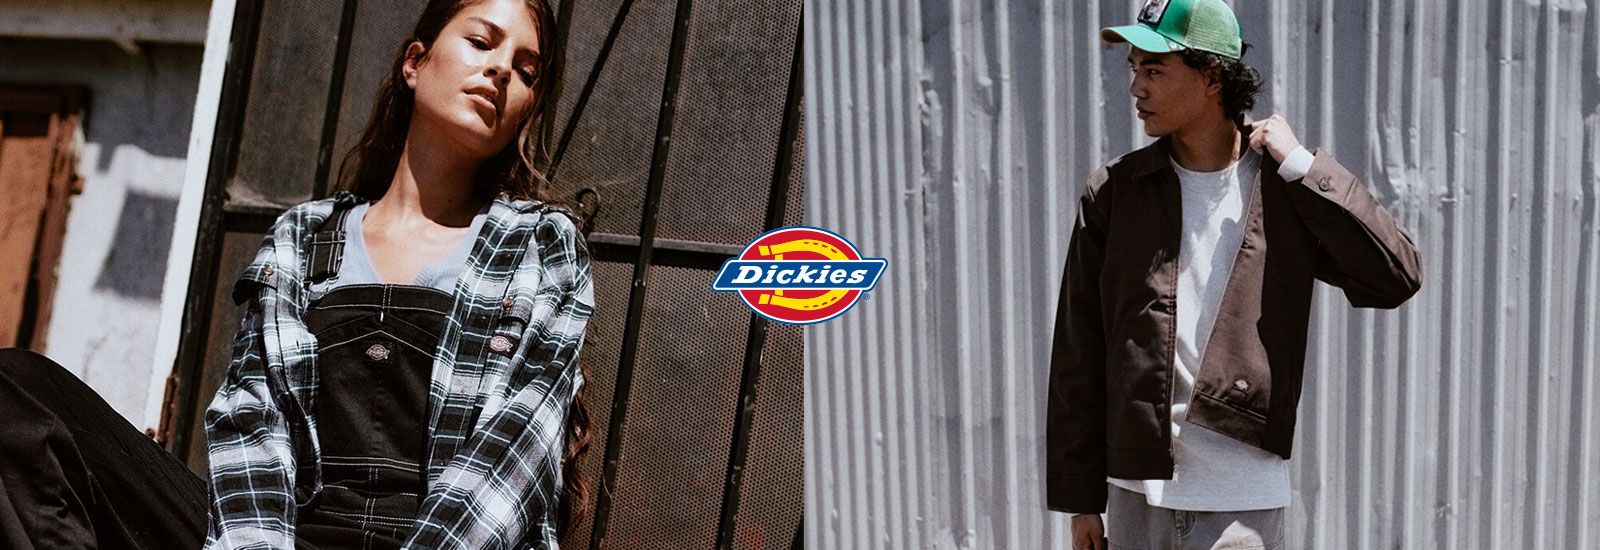 dickies  Dickies outfit women, Trendy outfits, Fashion outfits